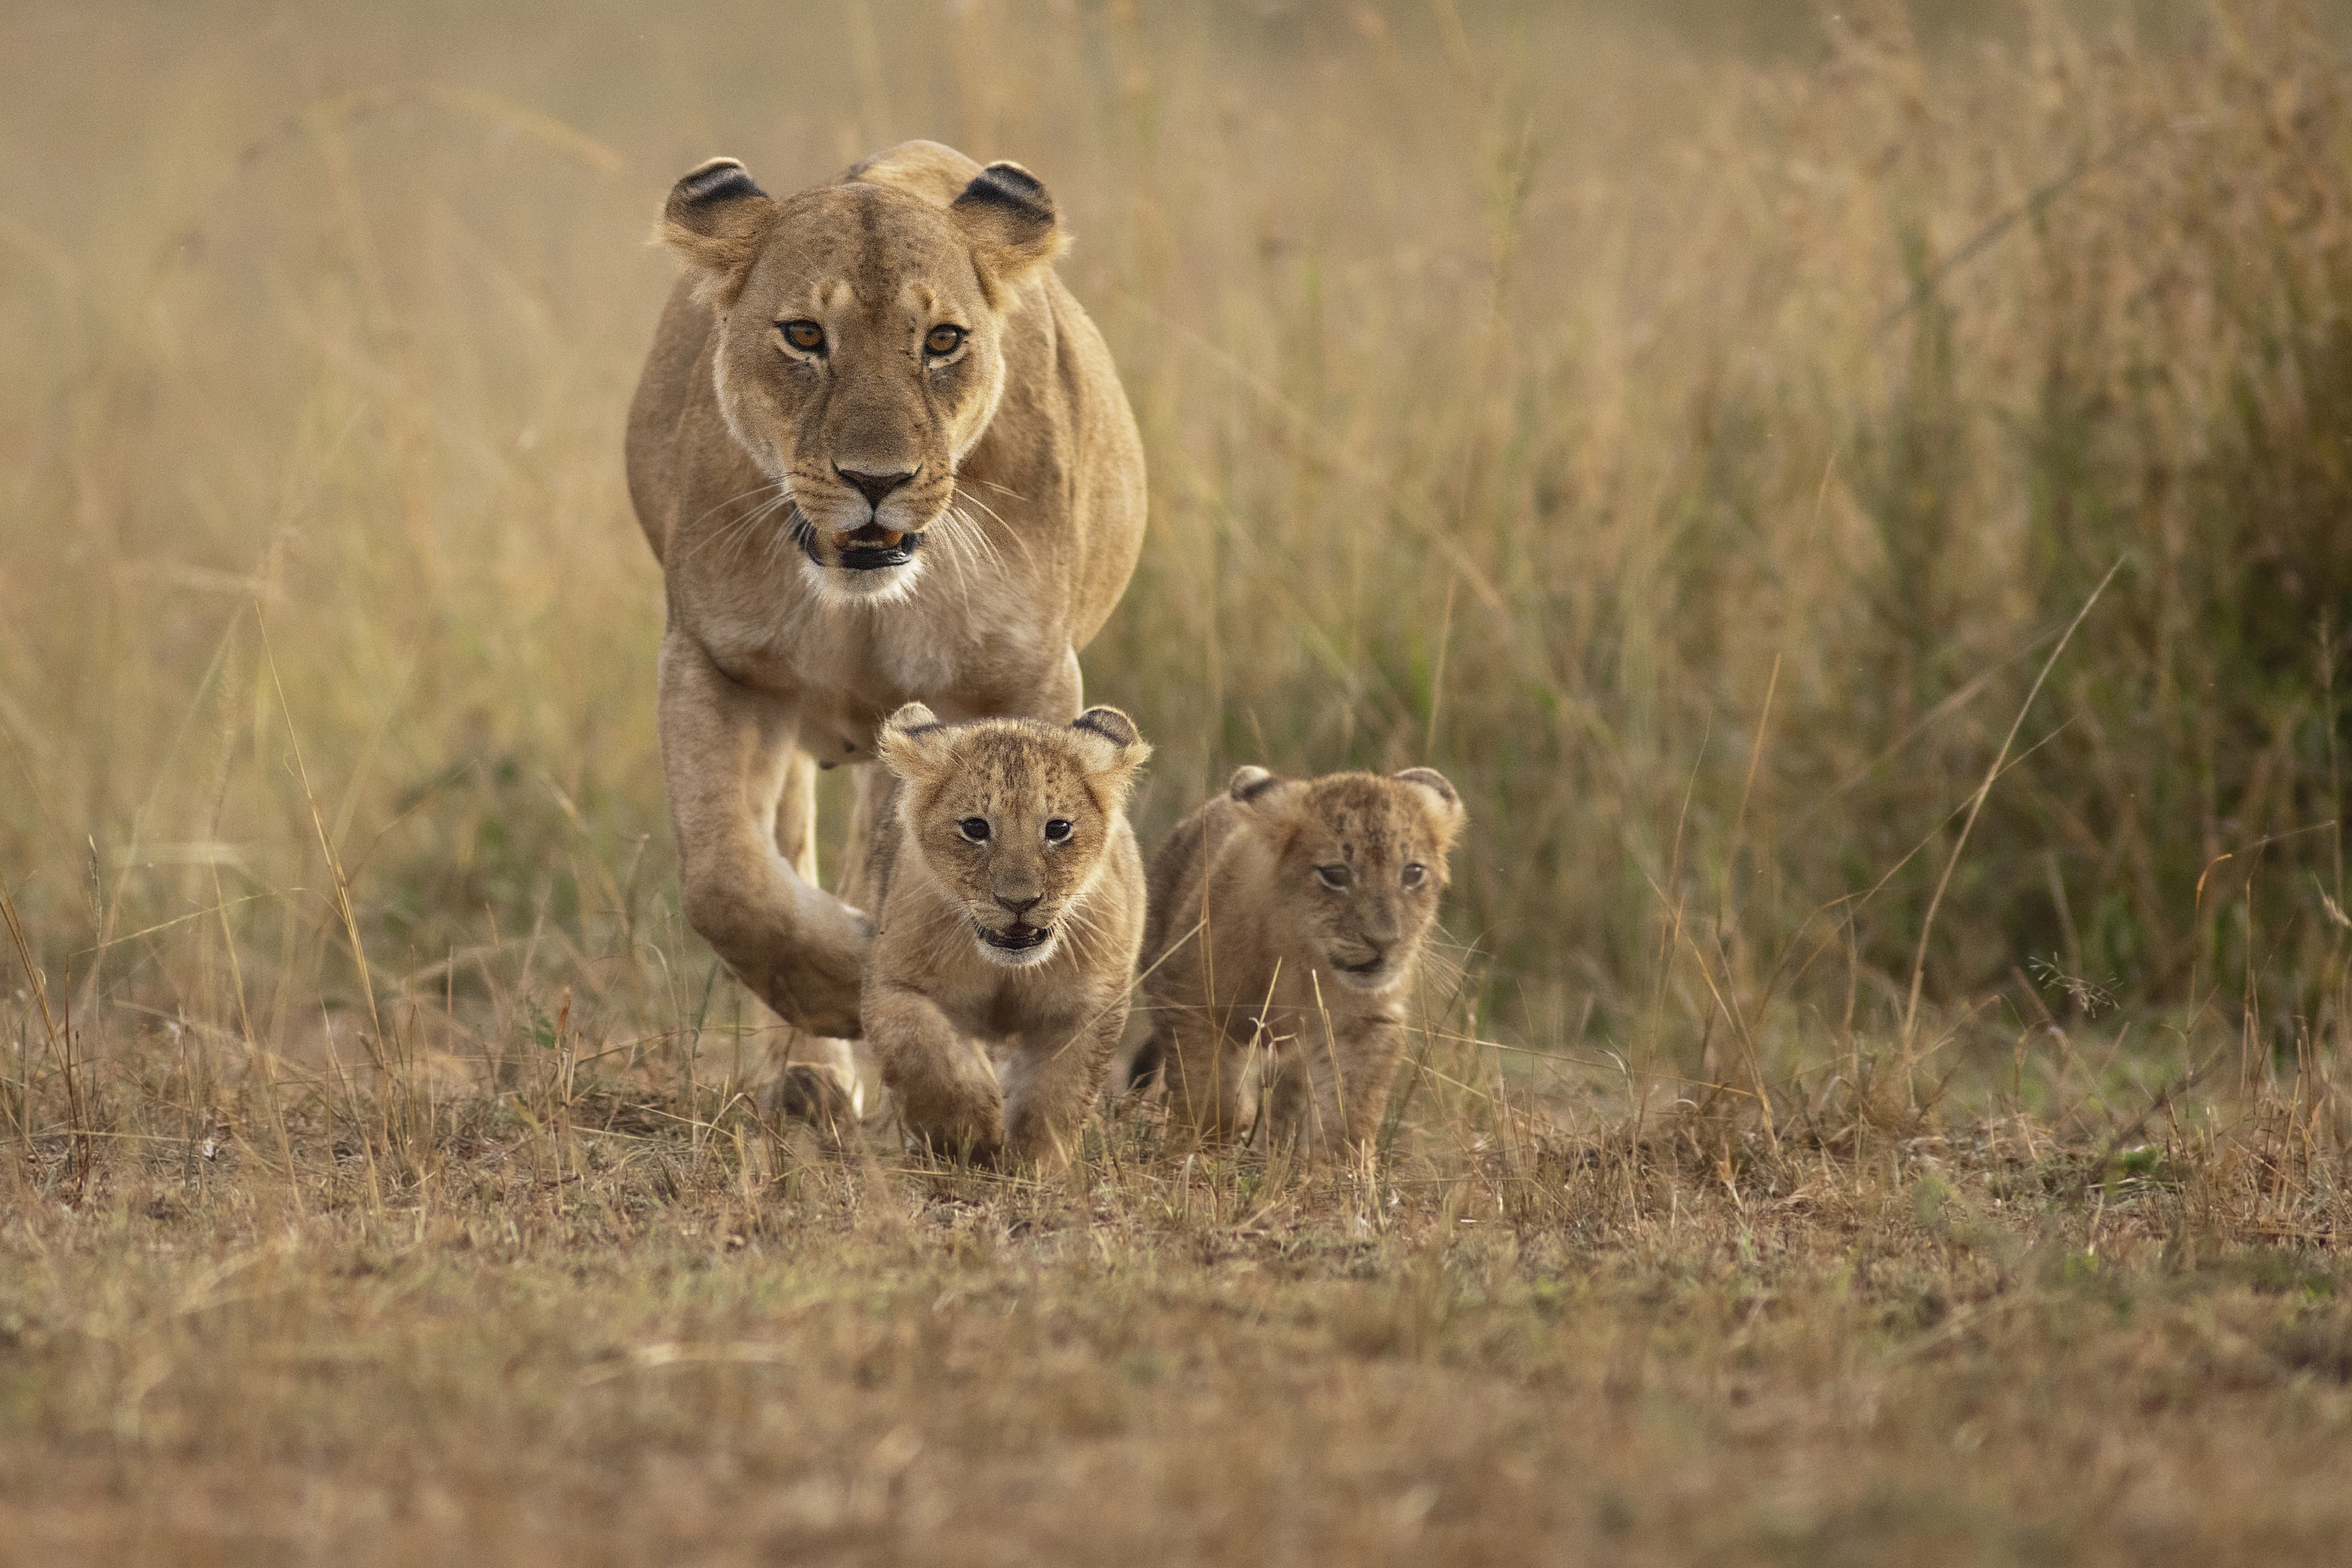 Lion guide: species facts and where they live in the wild - Discover  Wildlife